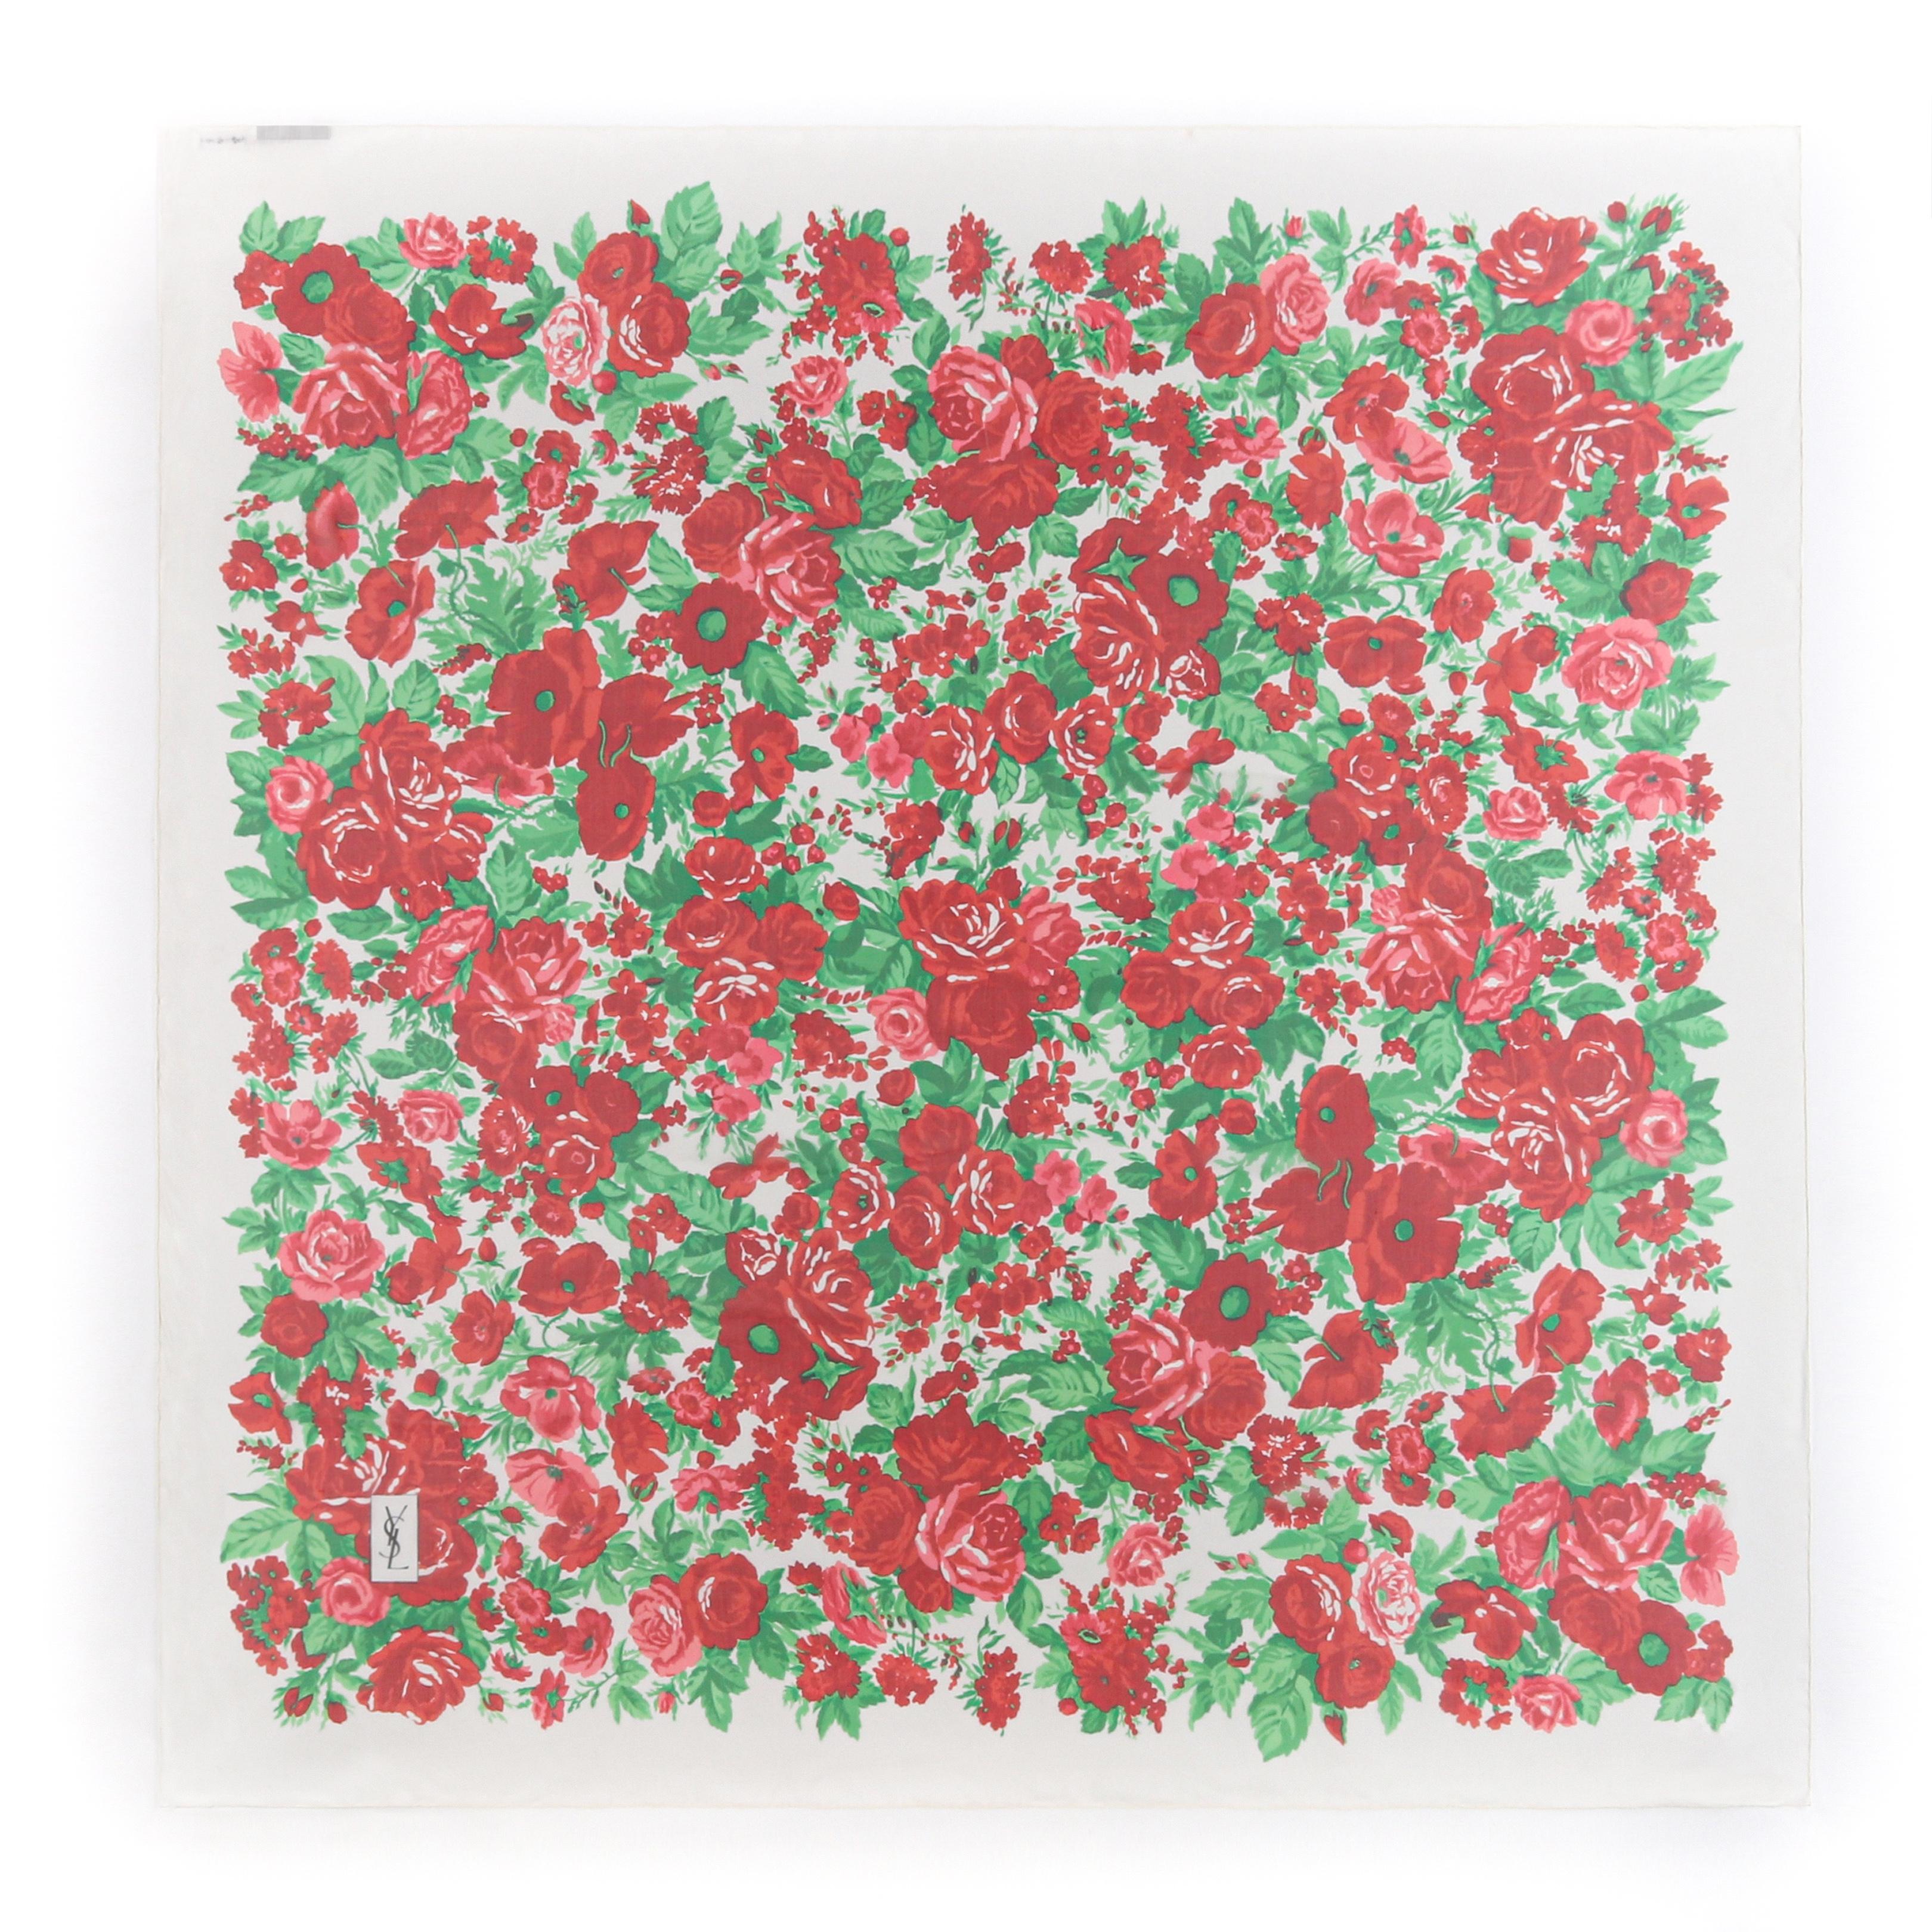 YVES SAINT LAURENT c.1980s Floral Peony & Rose Garden Silk Chiffon Scarf
 
Circa: 1980’s 
Brand / Manufacturer: Yves Saint Laurent
Designer: Yves Saint Laurent
Style: Square scarf
Color(s): Shades of red, green, white
Marked Fabric Content: “100%